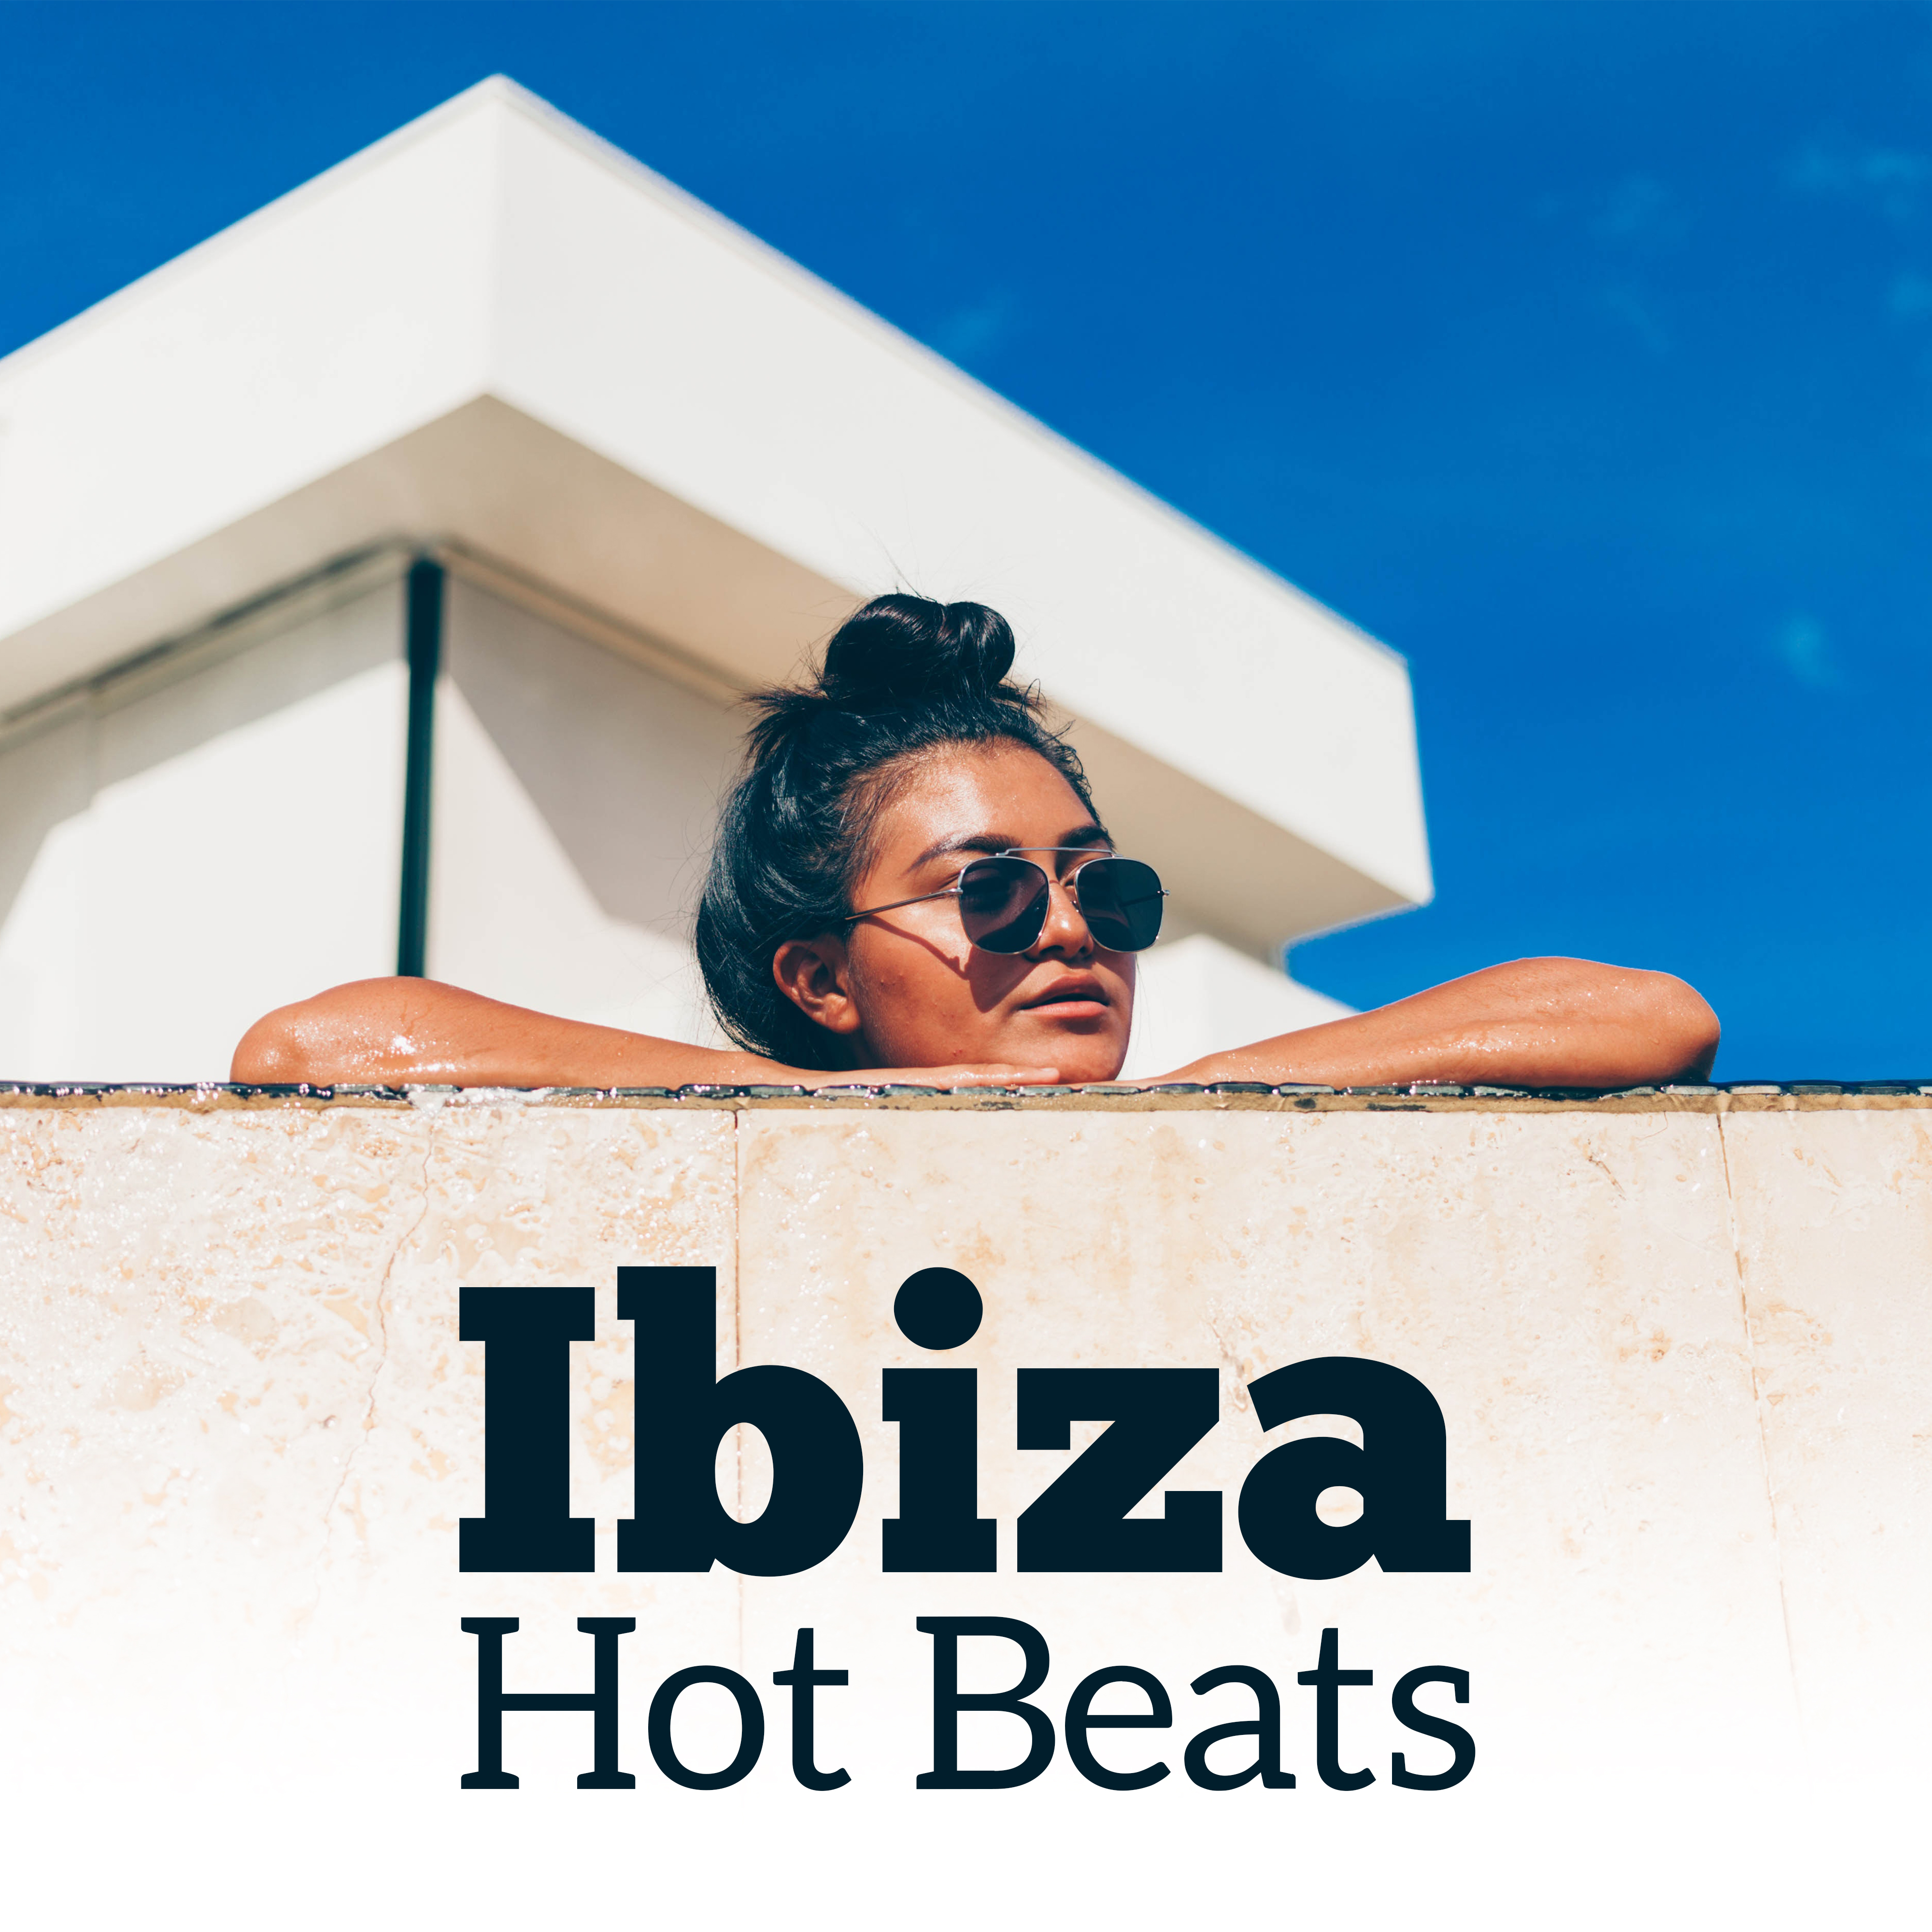 Ibiza Hot Beats – Chill Out 2017, Party Hard, Hot Vibes, Dance Music, Chillout 04 Ever